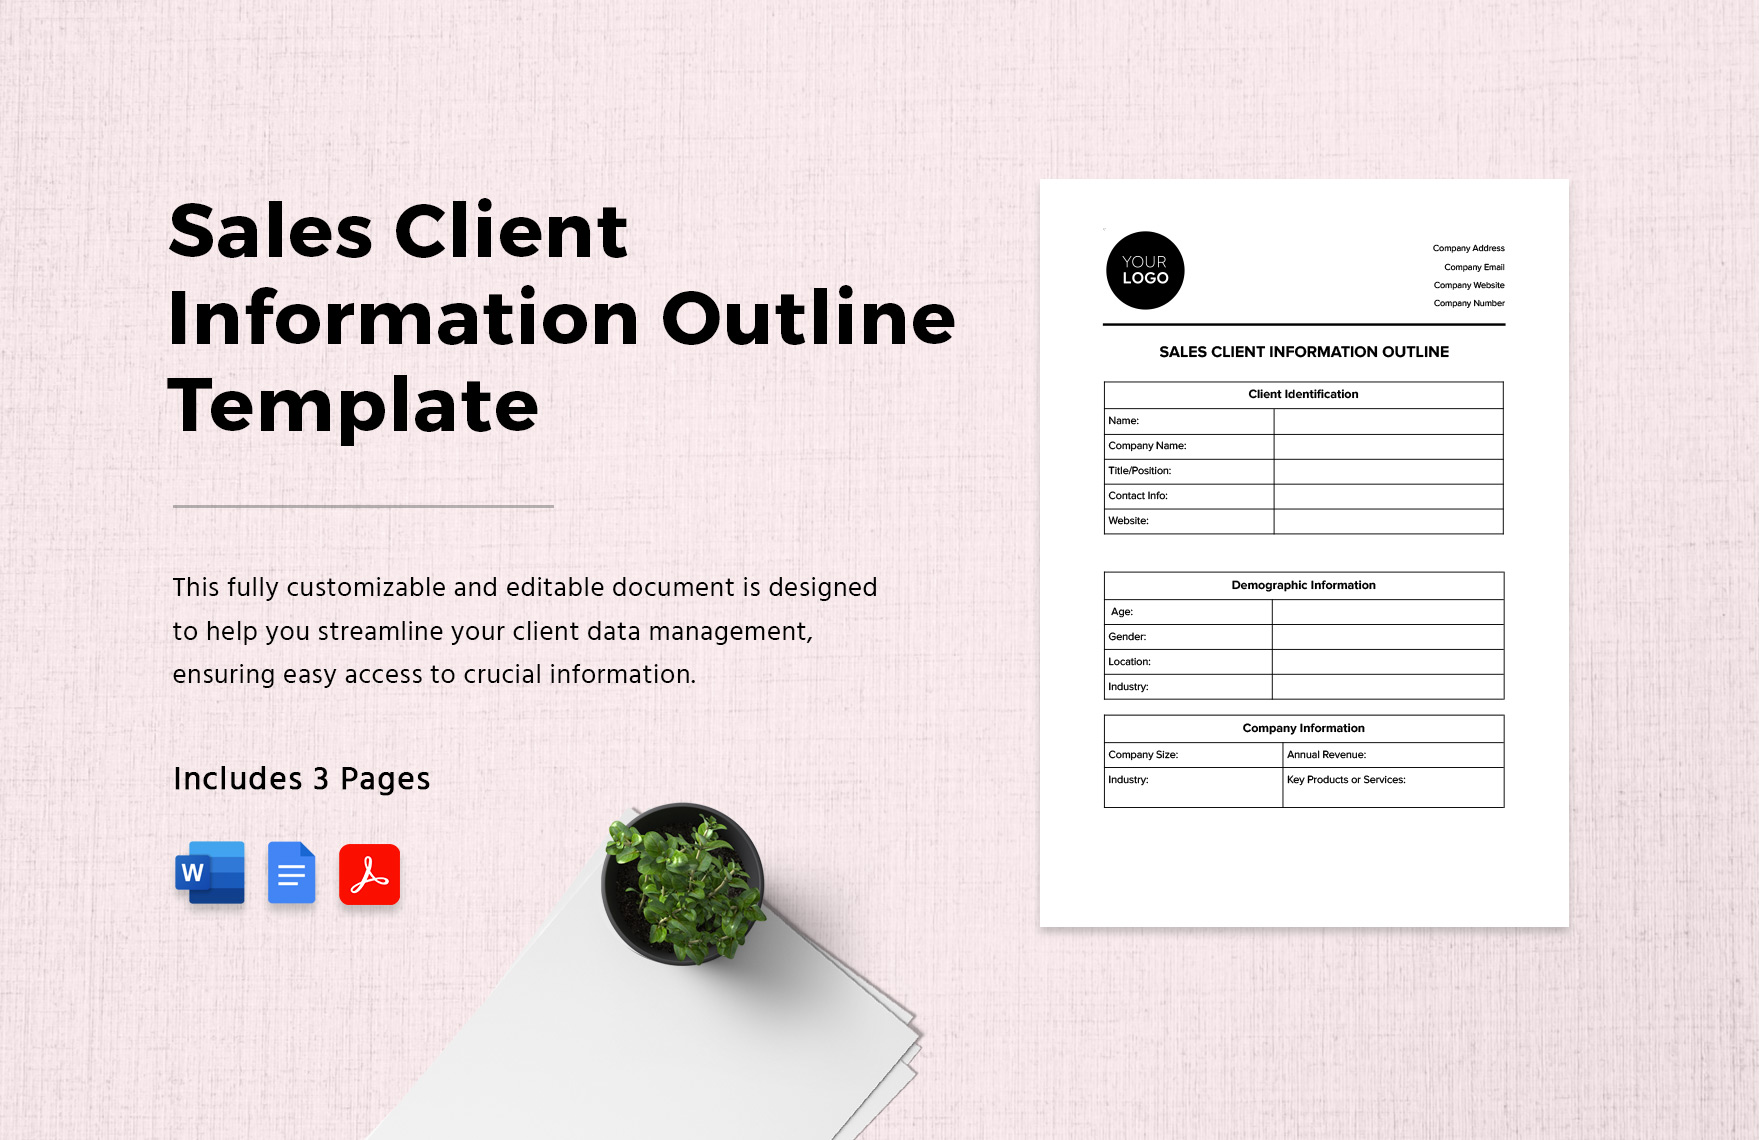 Sales Client Information Outline Template in Word, Google Docs, PDF